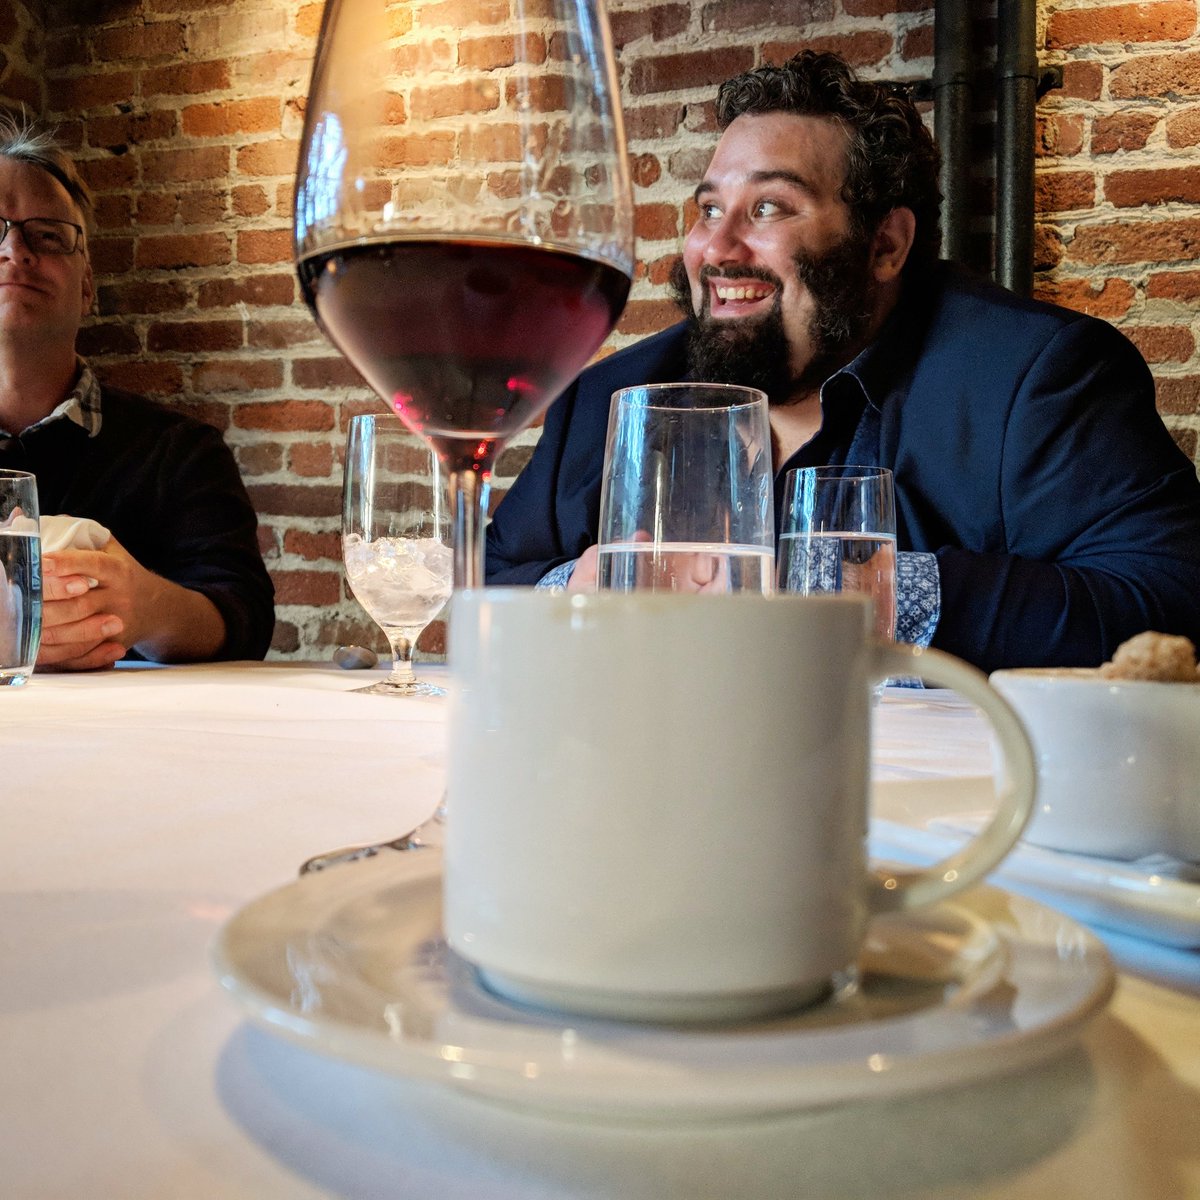 Dinner with the @TechDocs, @University & @TwitterOSS team at a swanky French joint.

Wagyu, sherry, espresso and a big smile on @Remy_D's face are all the evidence you need that this was a great meal.

#french #finedining #teambuilding #twitter #techdocs #opensource